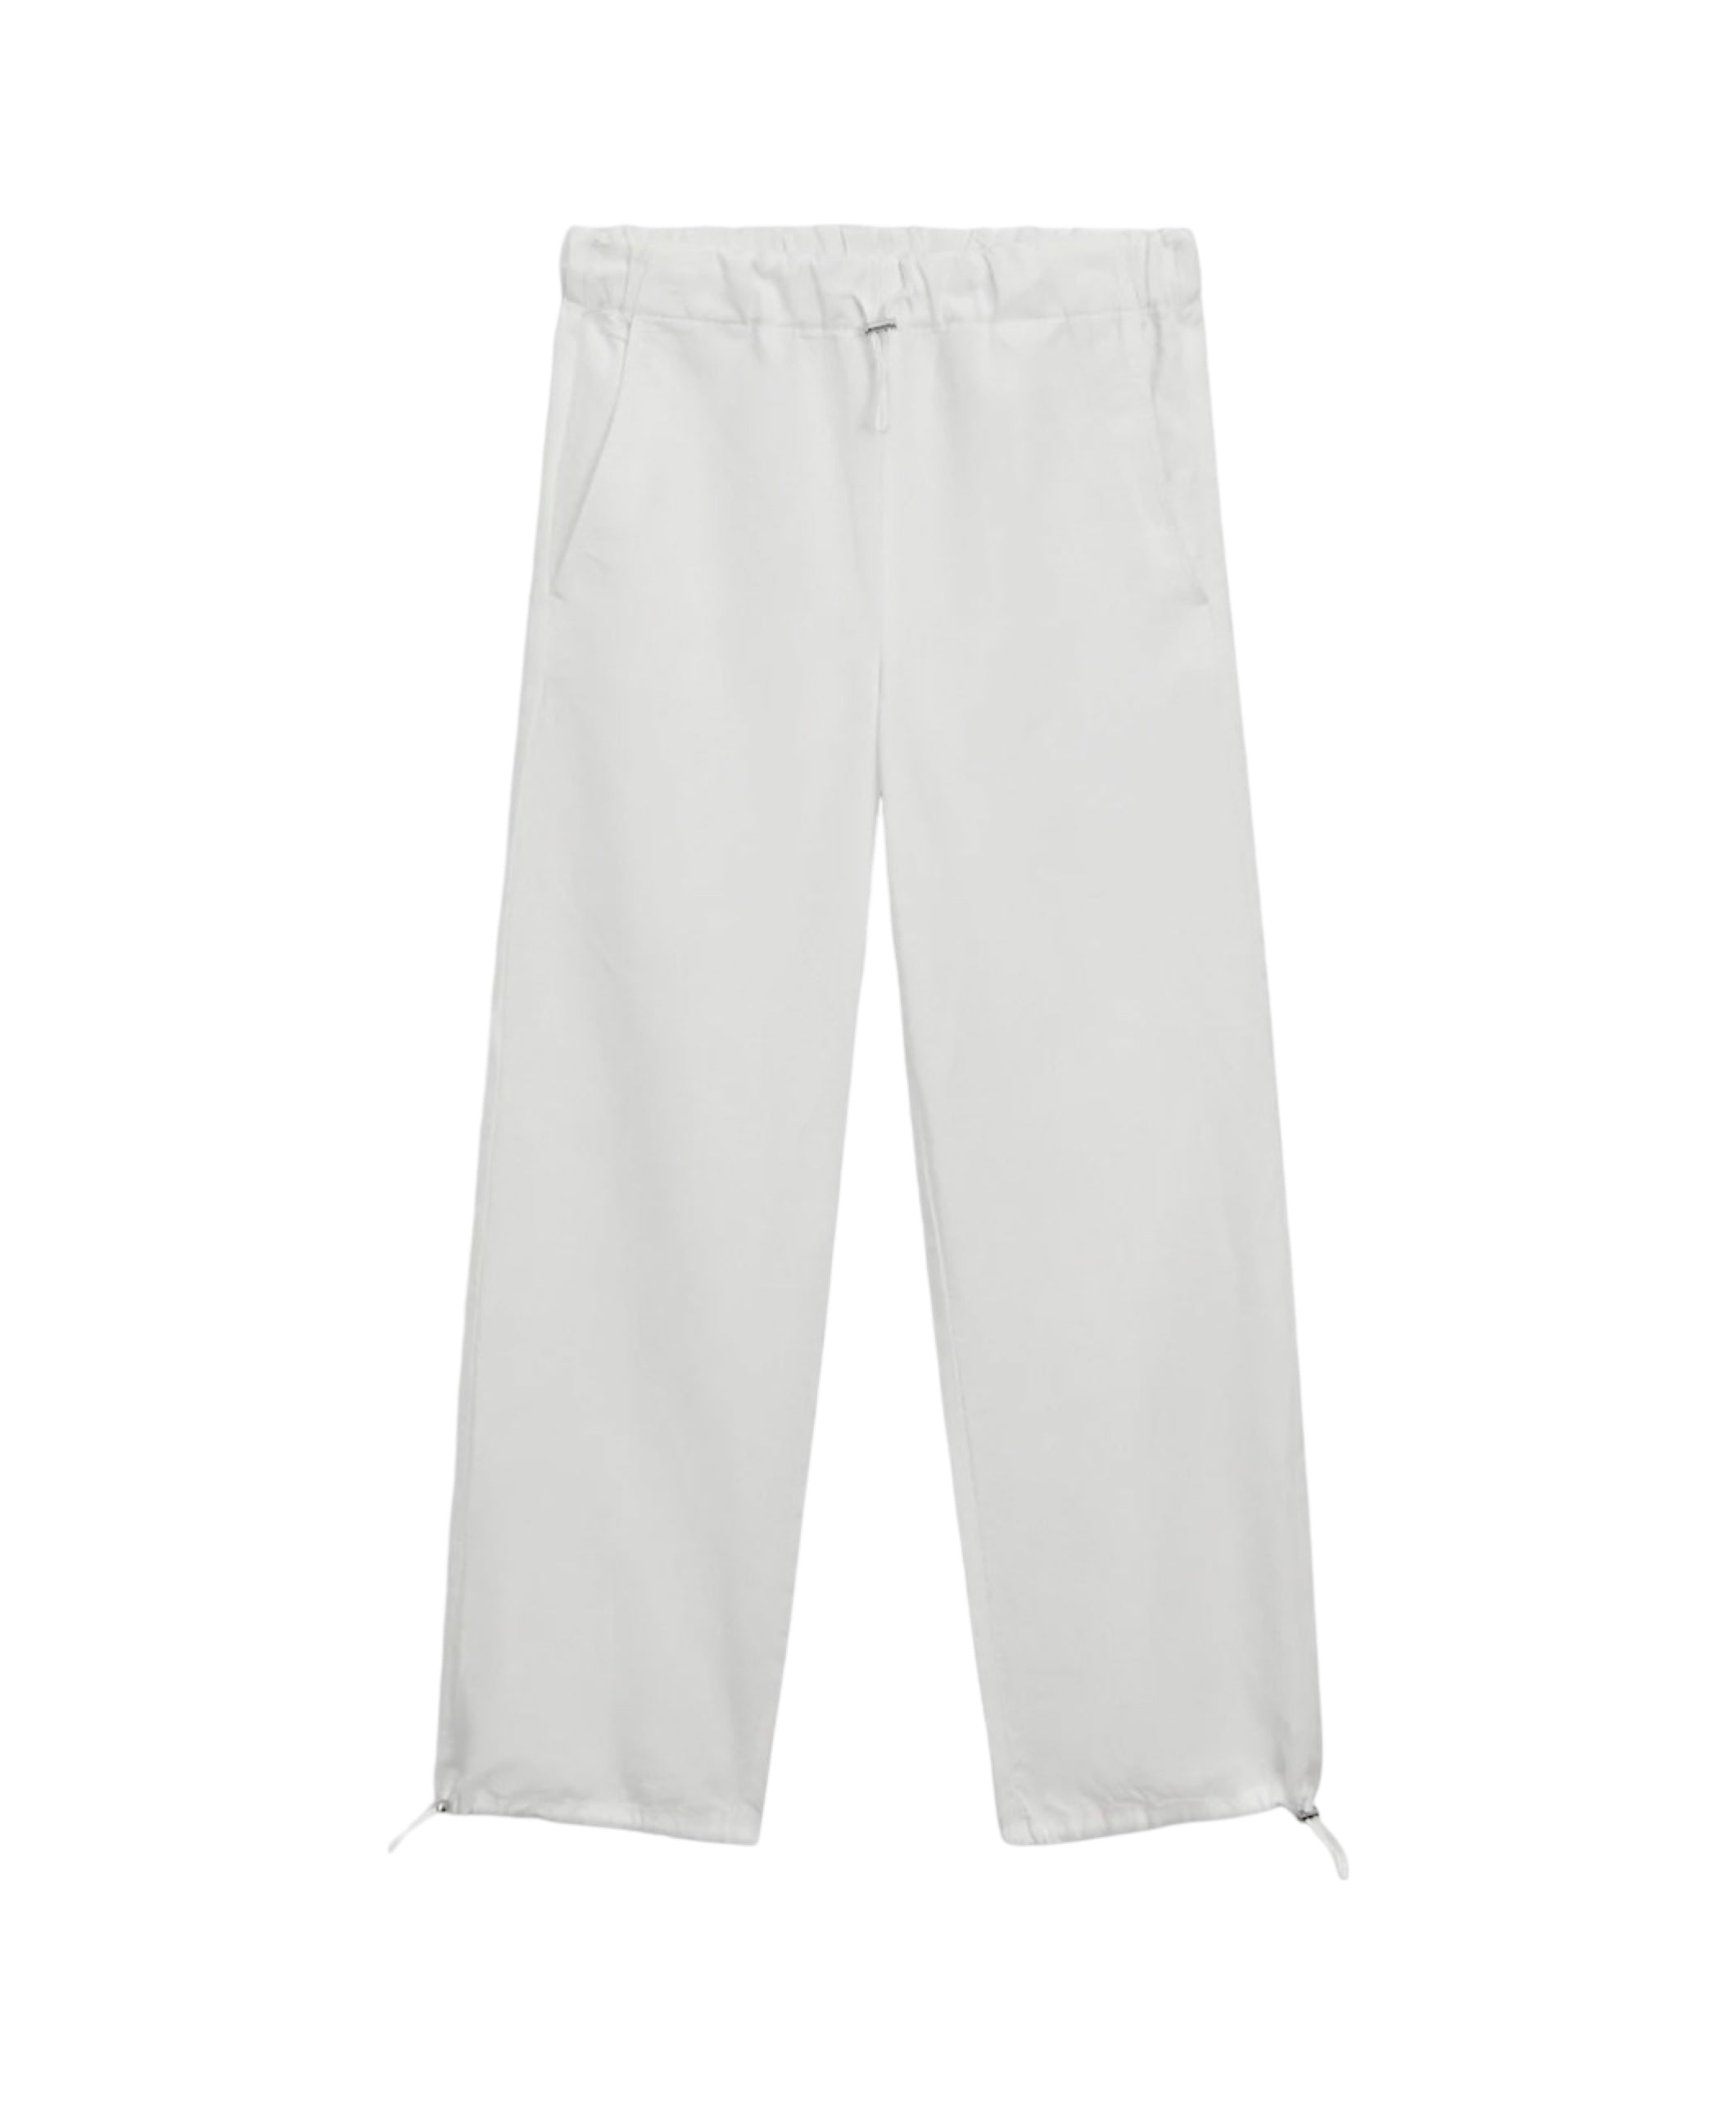 Trousers with Elasticated Waistband and Adjustable Hems